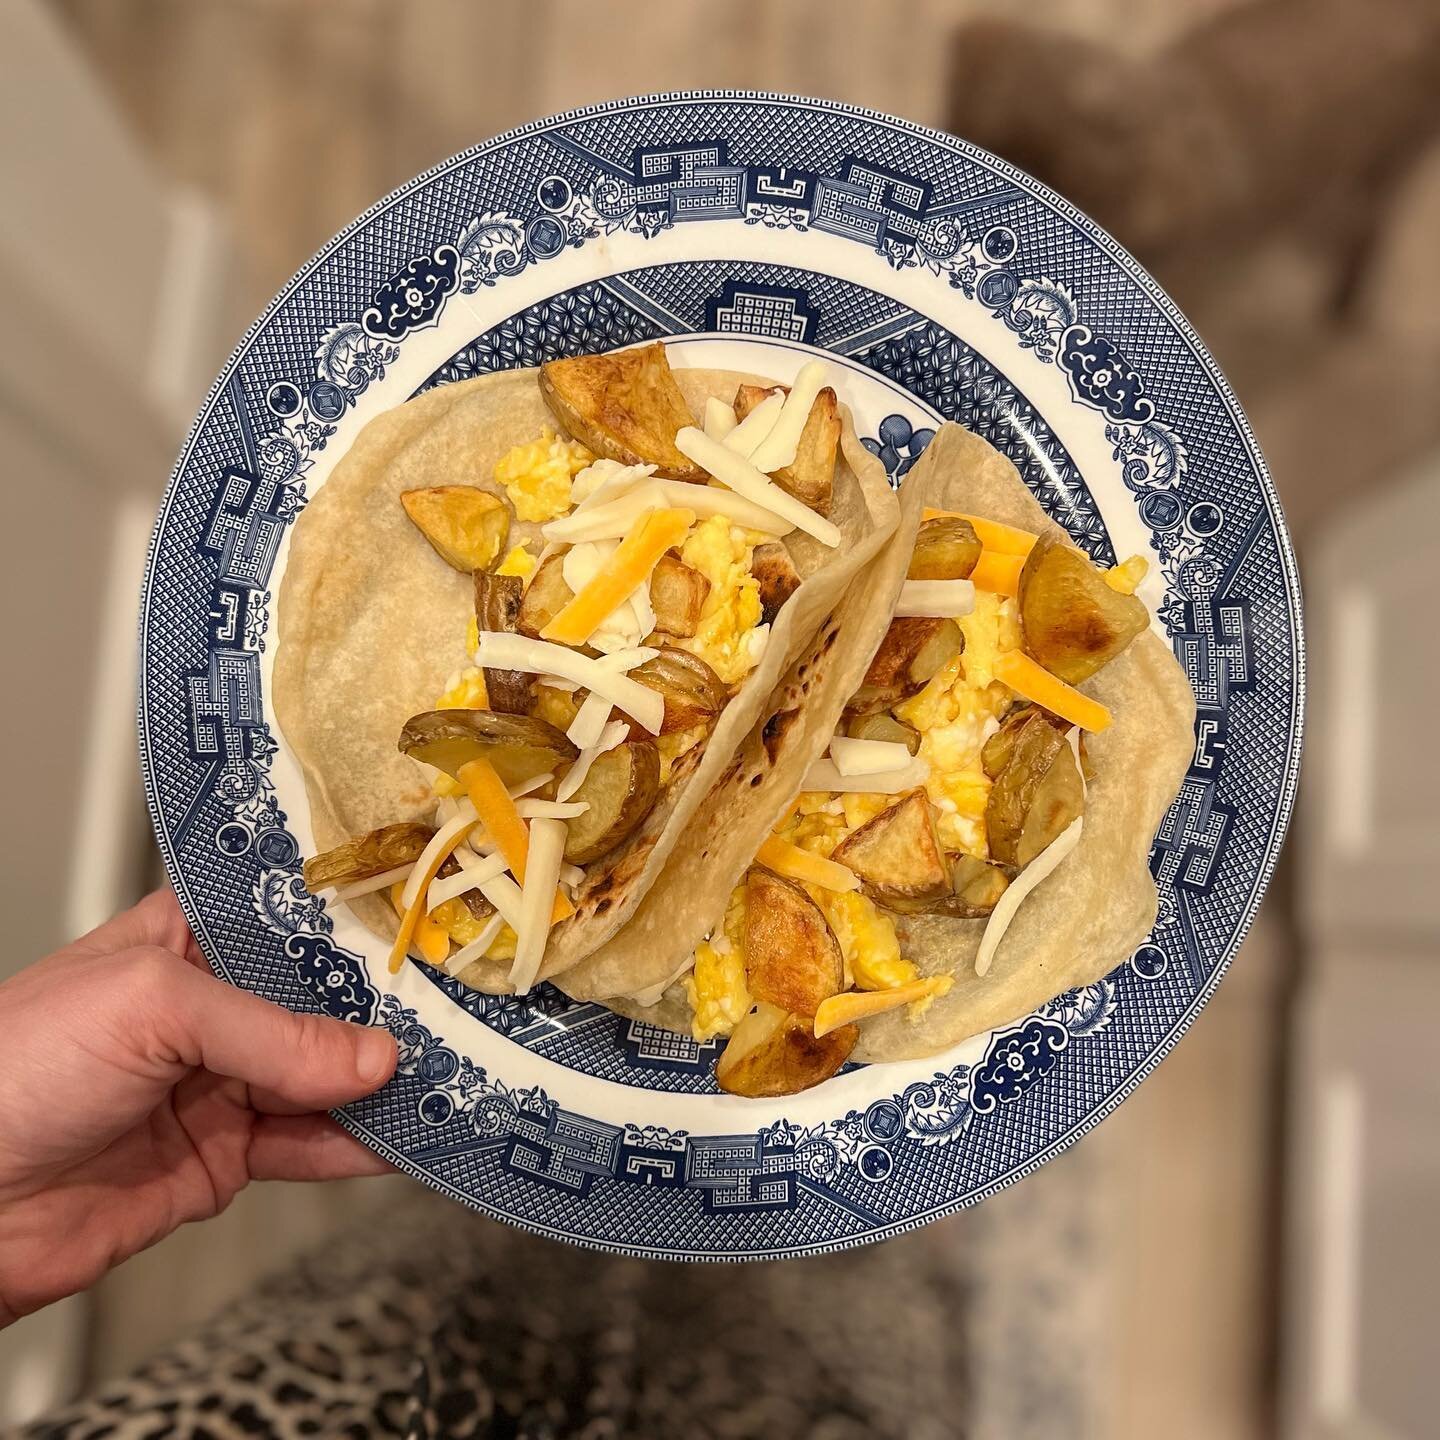 saturdays are for Build Your Own Breakfast Taco.

because it&rsquo;s one of our absolute favorite family meals. 

because it can be taken to-go for our Saturday Family Adventure.

because it&rsquo;s filling and can be made with a whole laundry list o